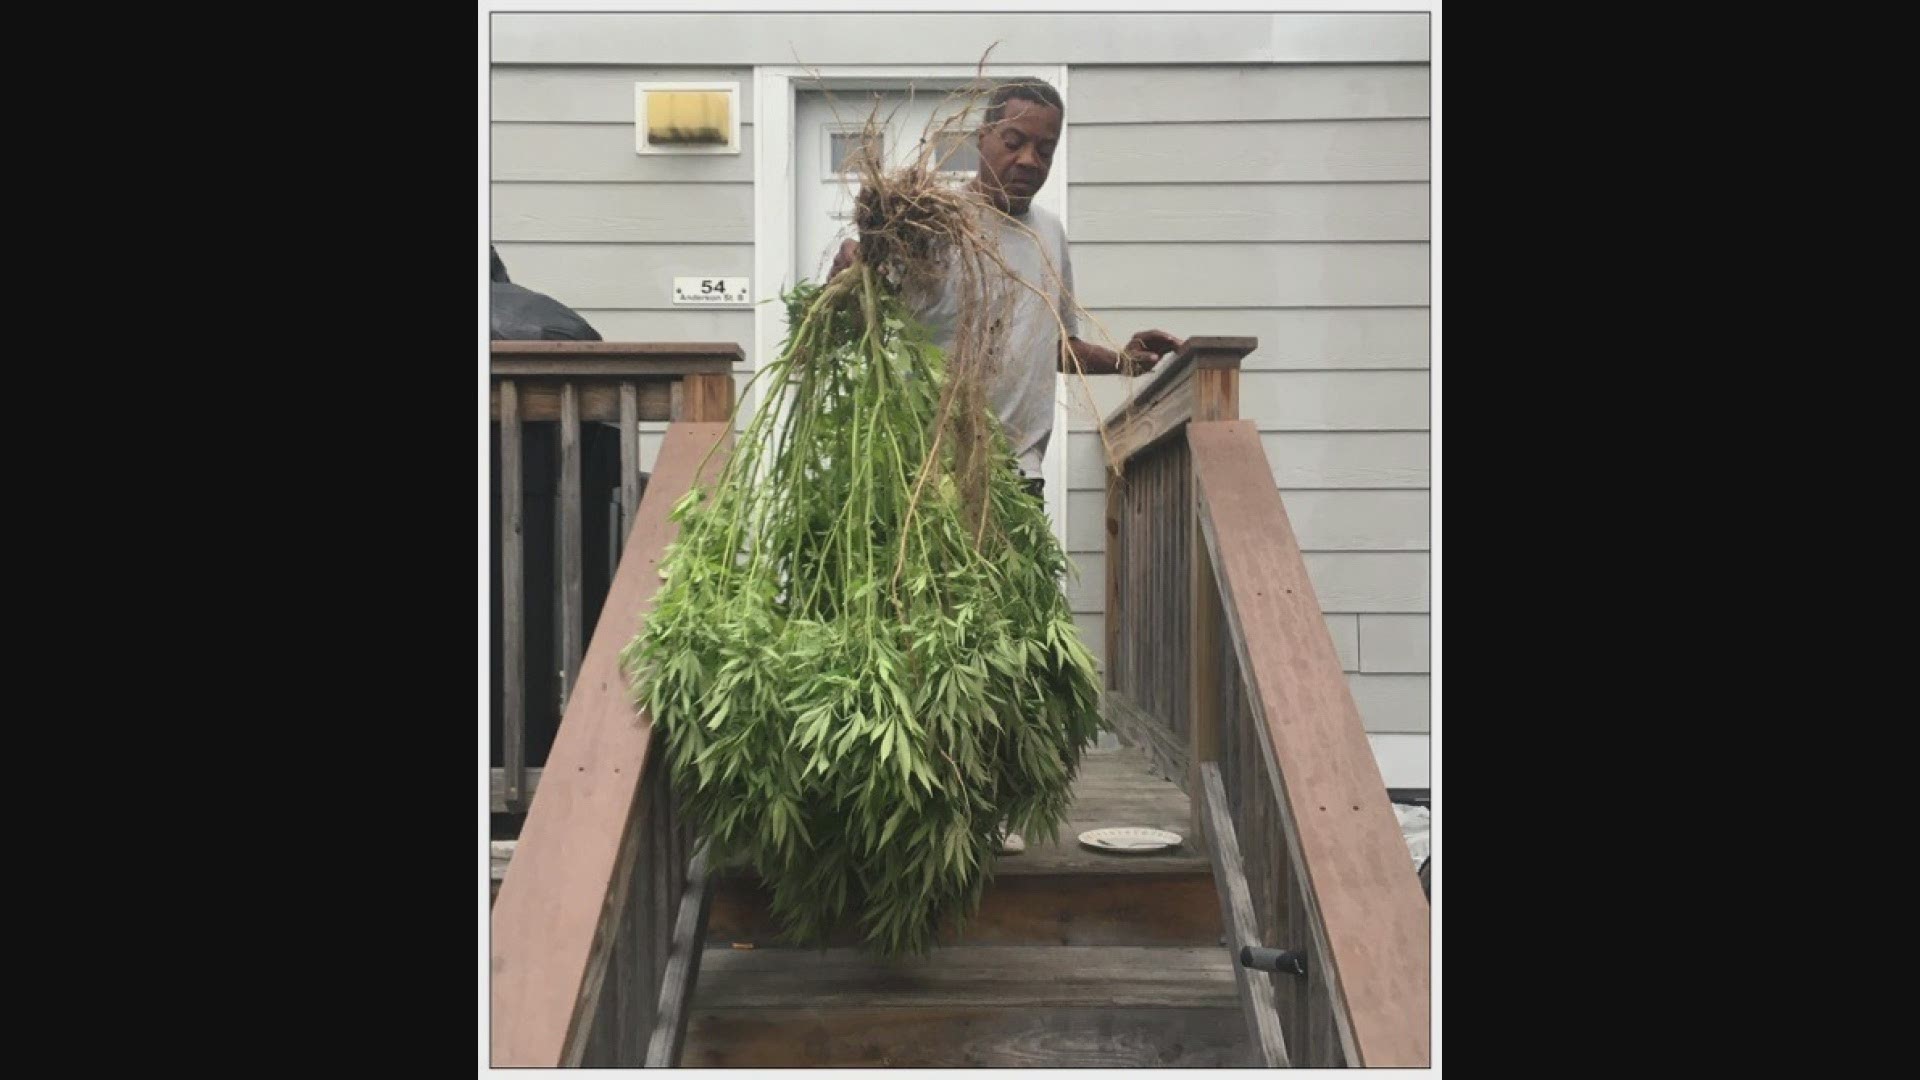 A Portland, Maine man woke up to realize his large pot plant had been stolen. He followed the trail of leaves and clumps of dirt until he found it.